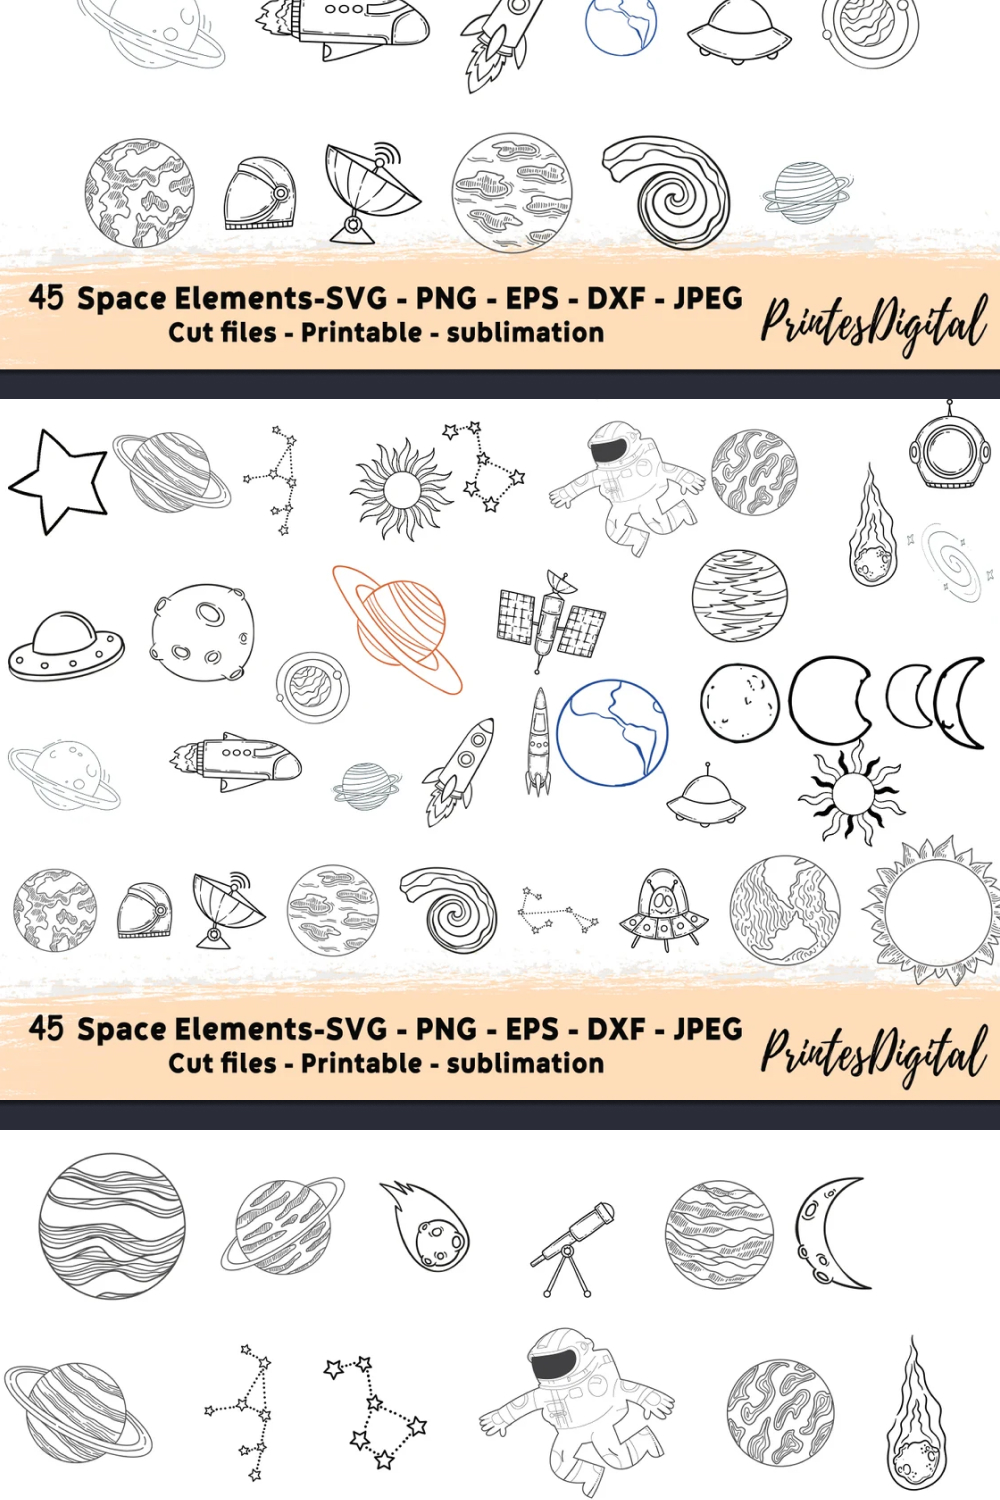 Images with planets and spaceships rockets and other space.